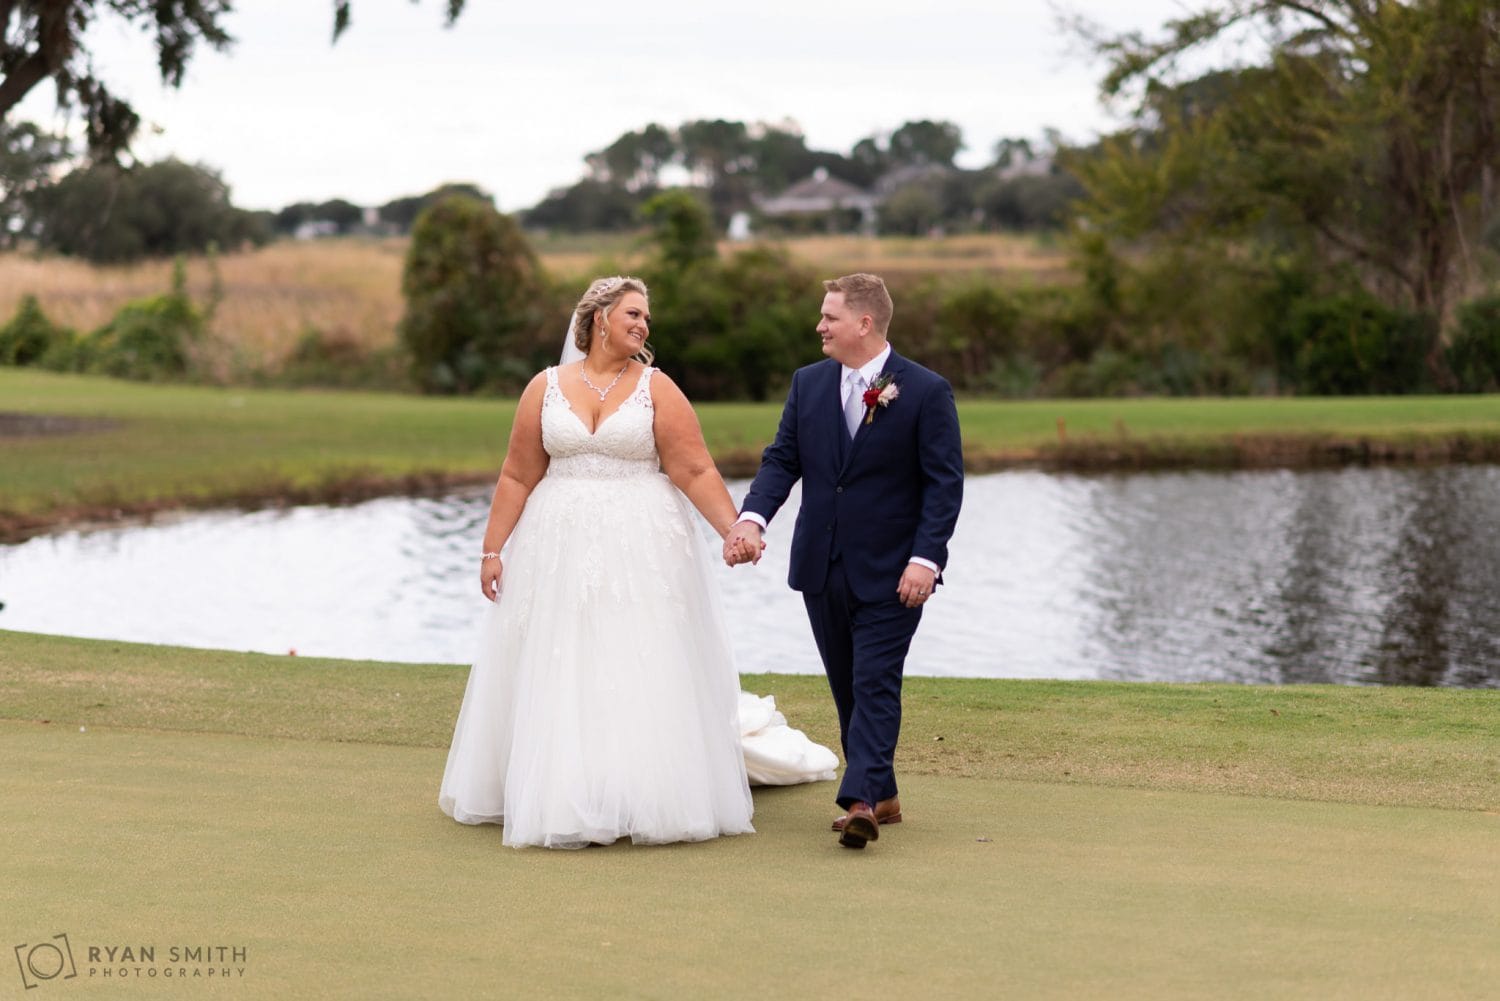 Bride and groom walking down the golf course